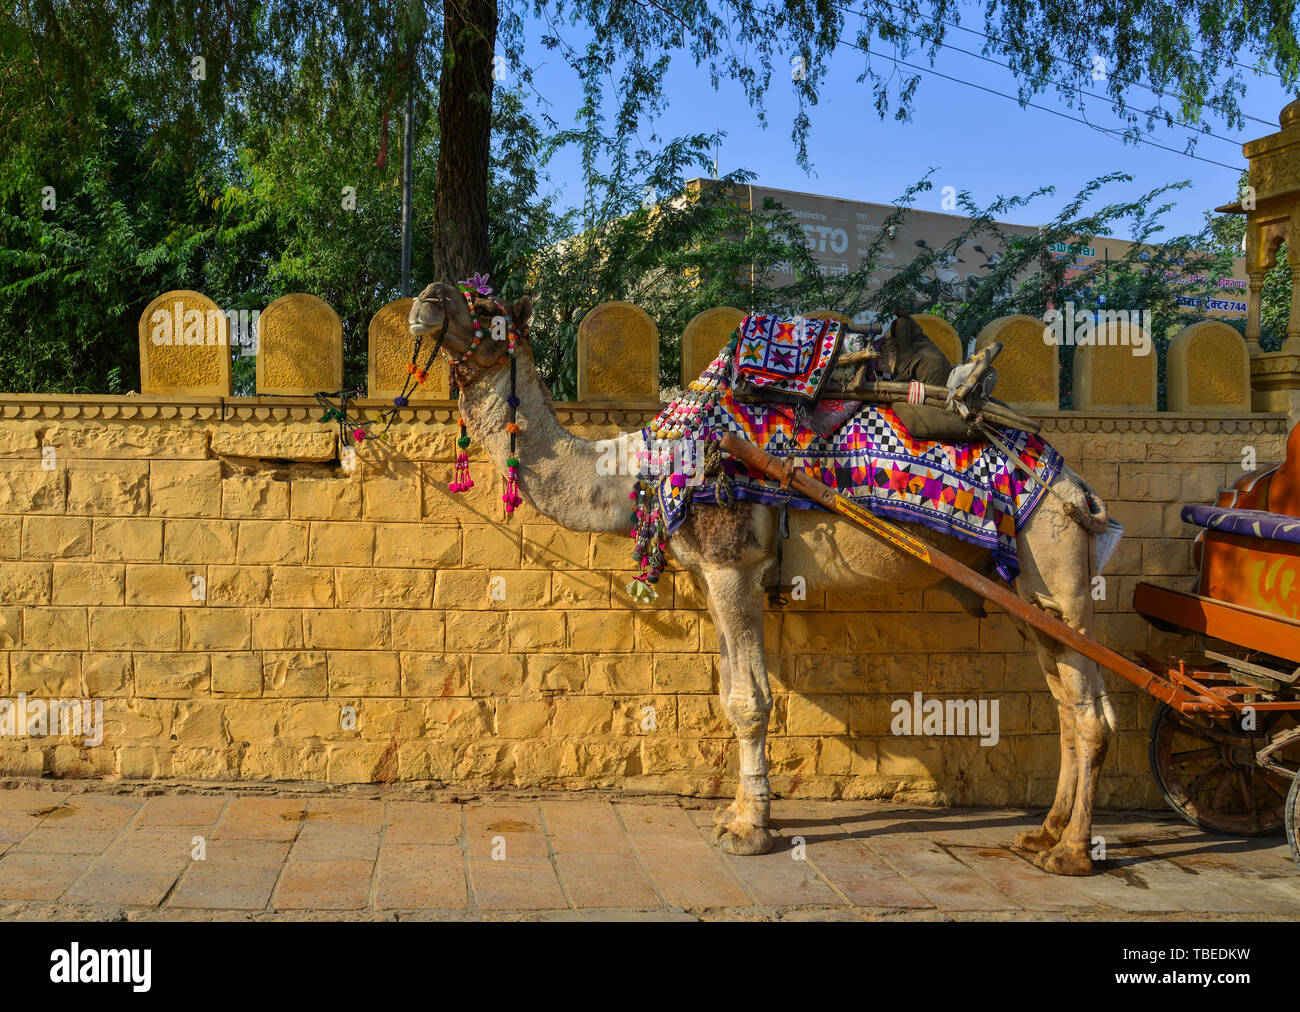 Jaisalmer, India - Nov 9, 2017. Camel taxi in the streets of Jaisalmer, India. Jaisalmer is on the westernmost frontier of India. Stock Photo